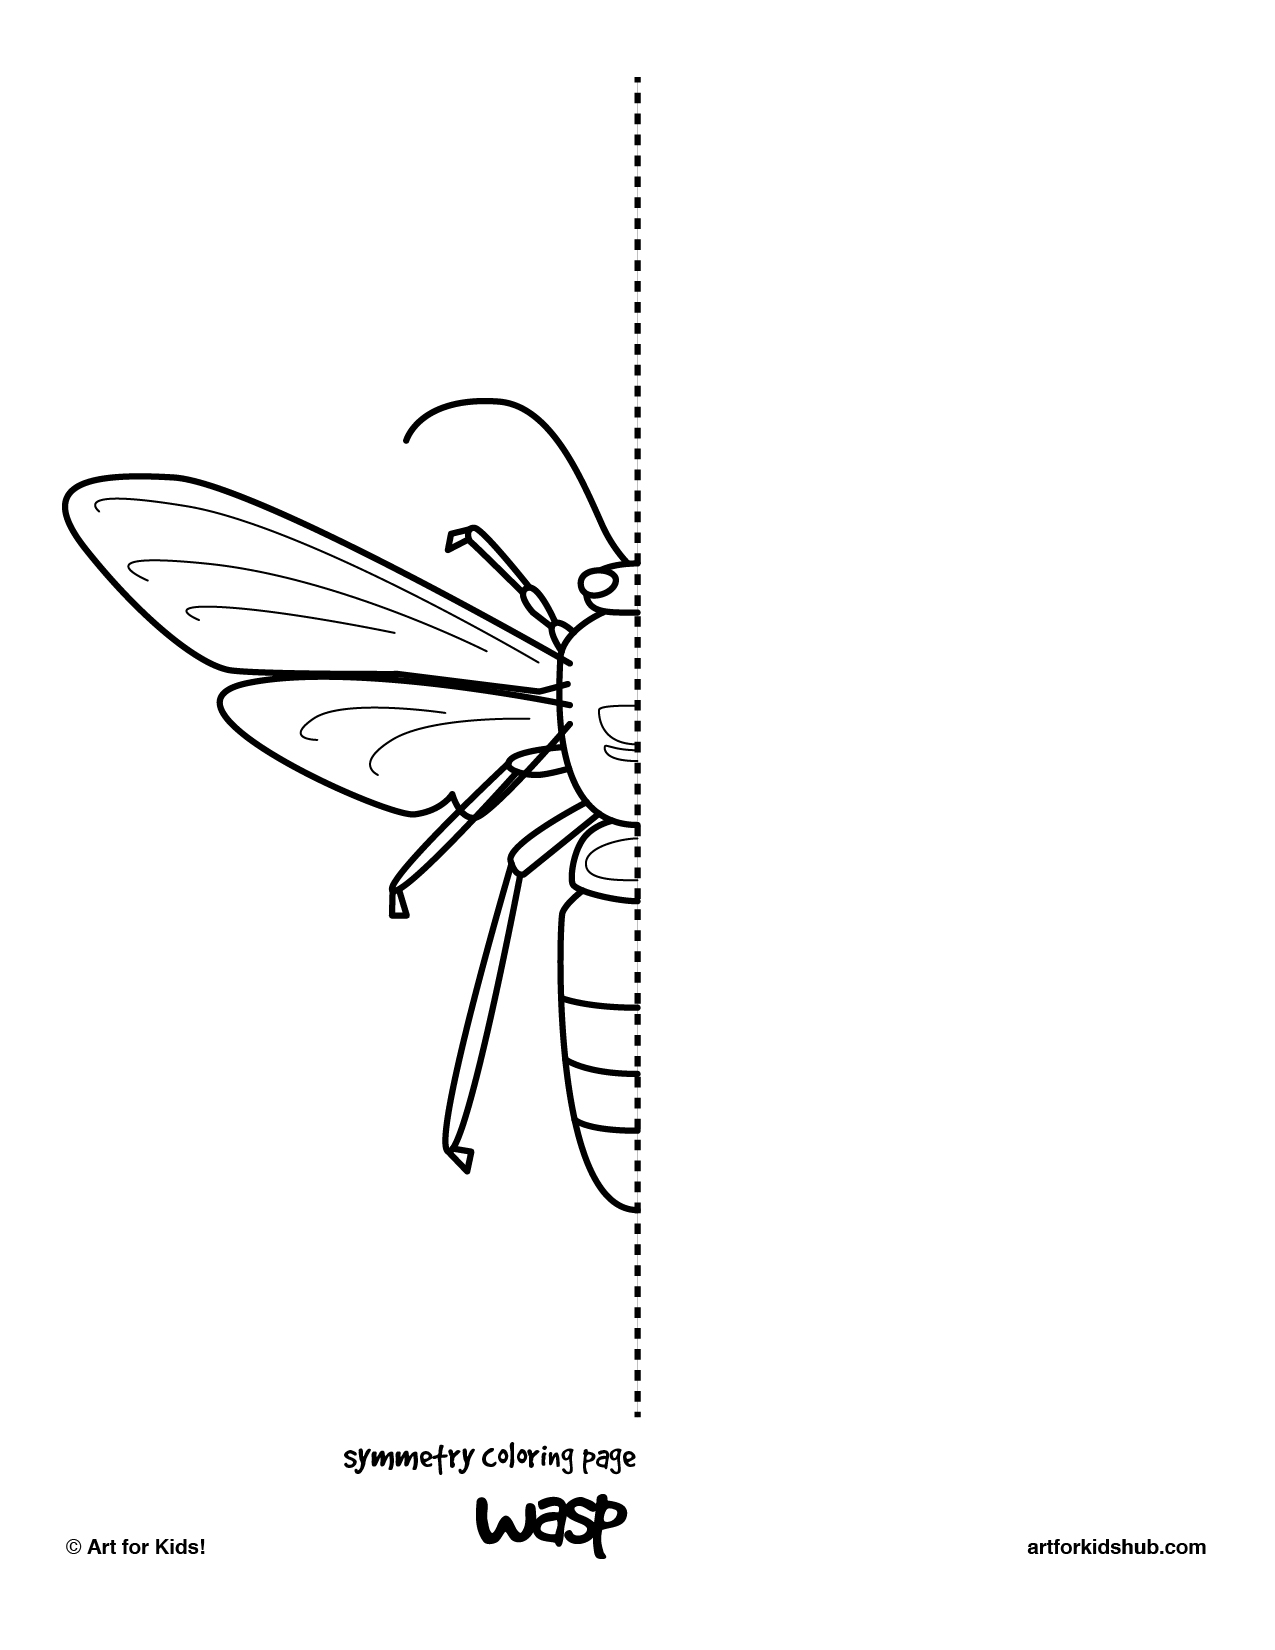 10 Free Coloring Pages - Bug Symmetry - Art For Kids Hub -